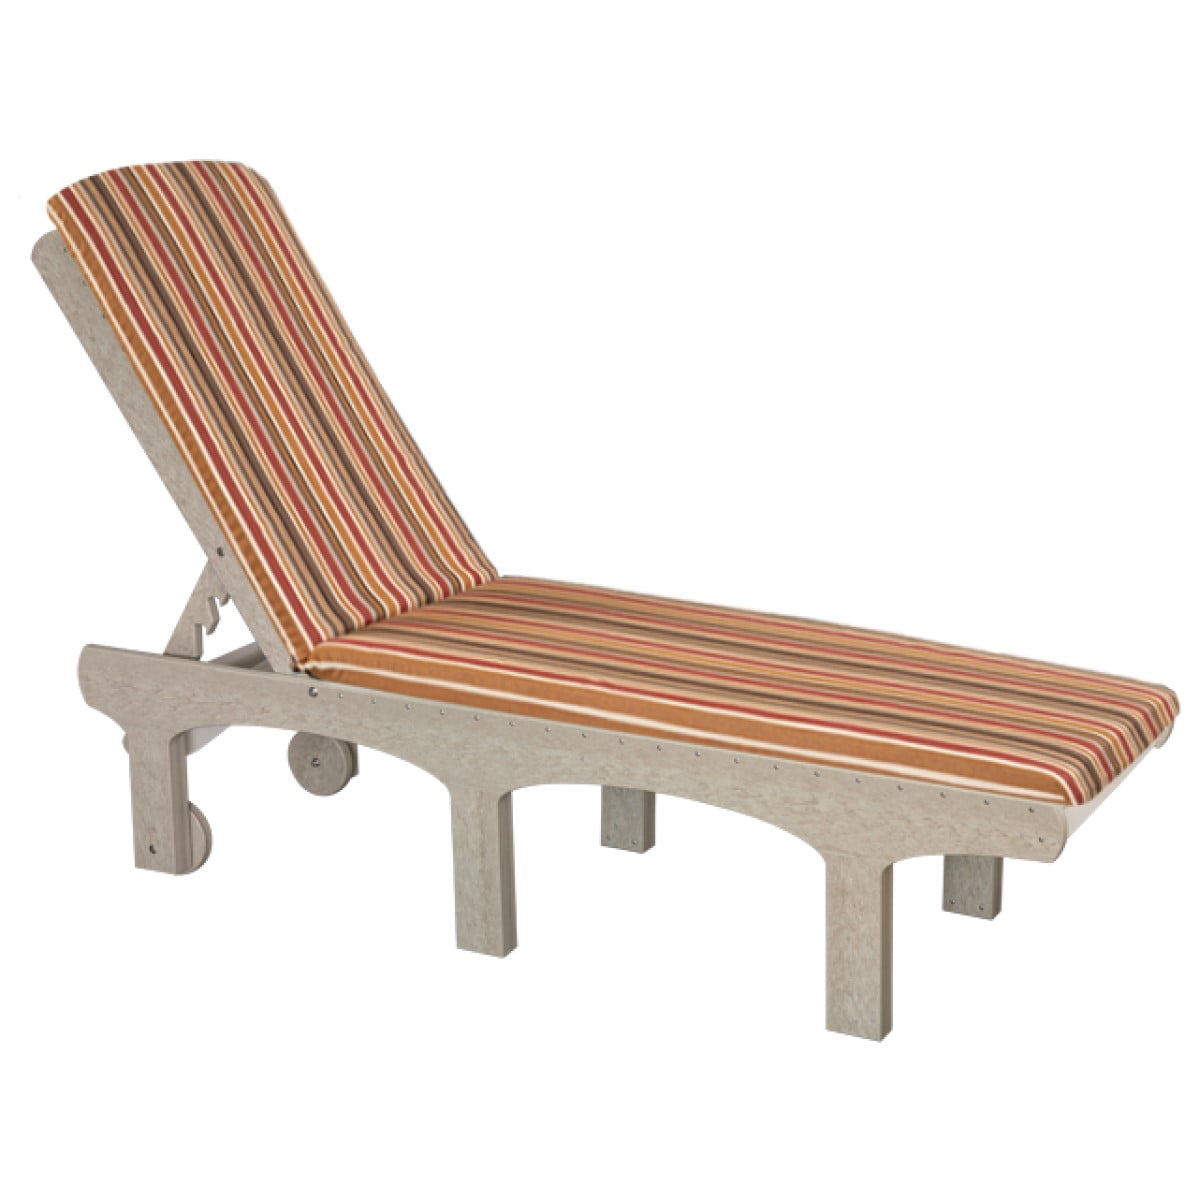 Finch SunSurf Chaise Lounge Seat and Back Cushion